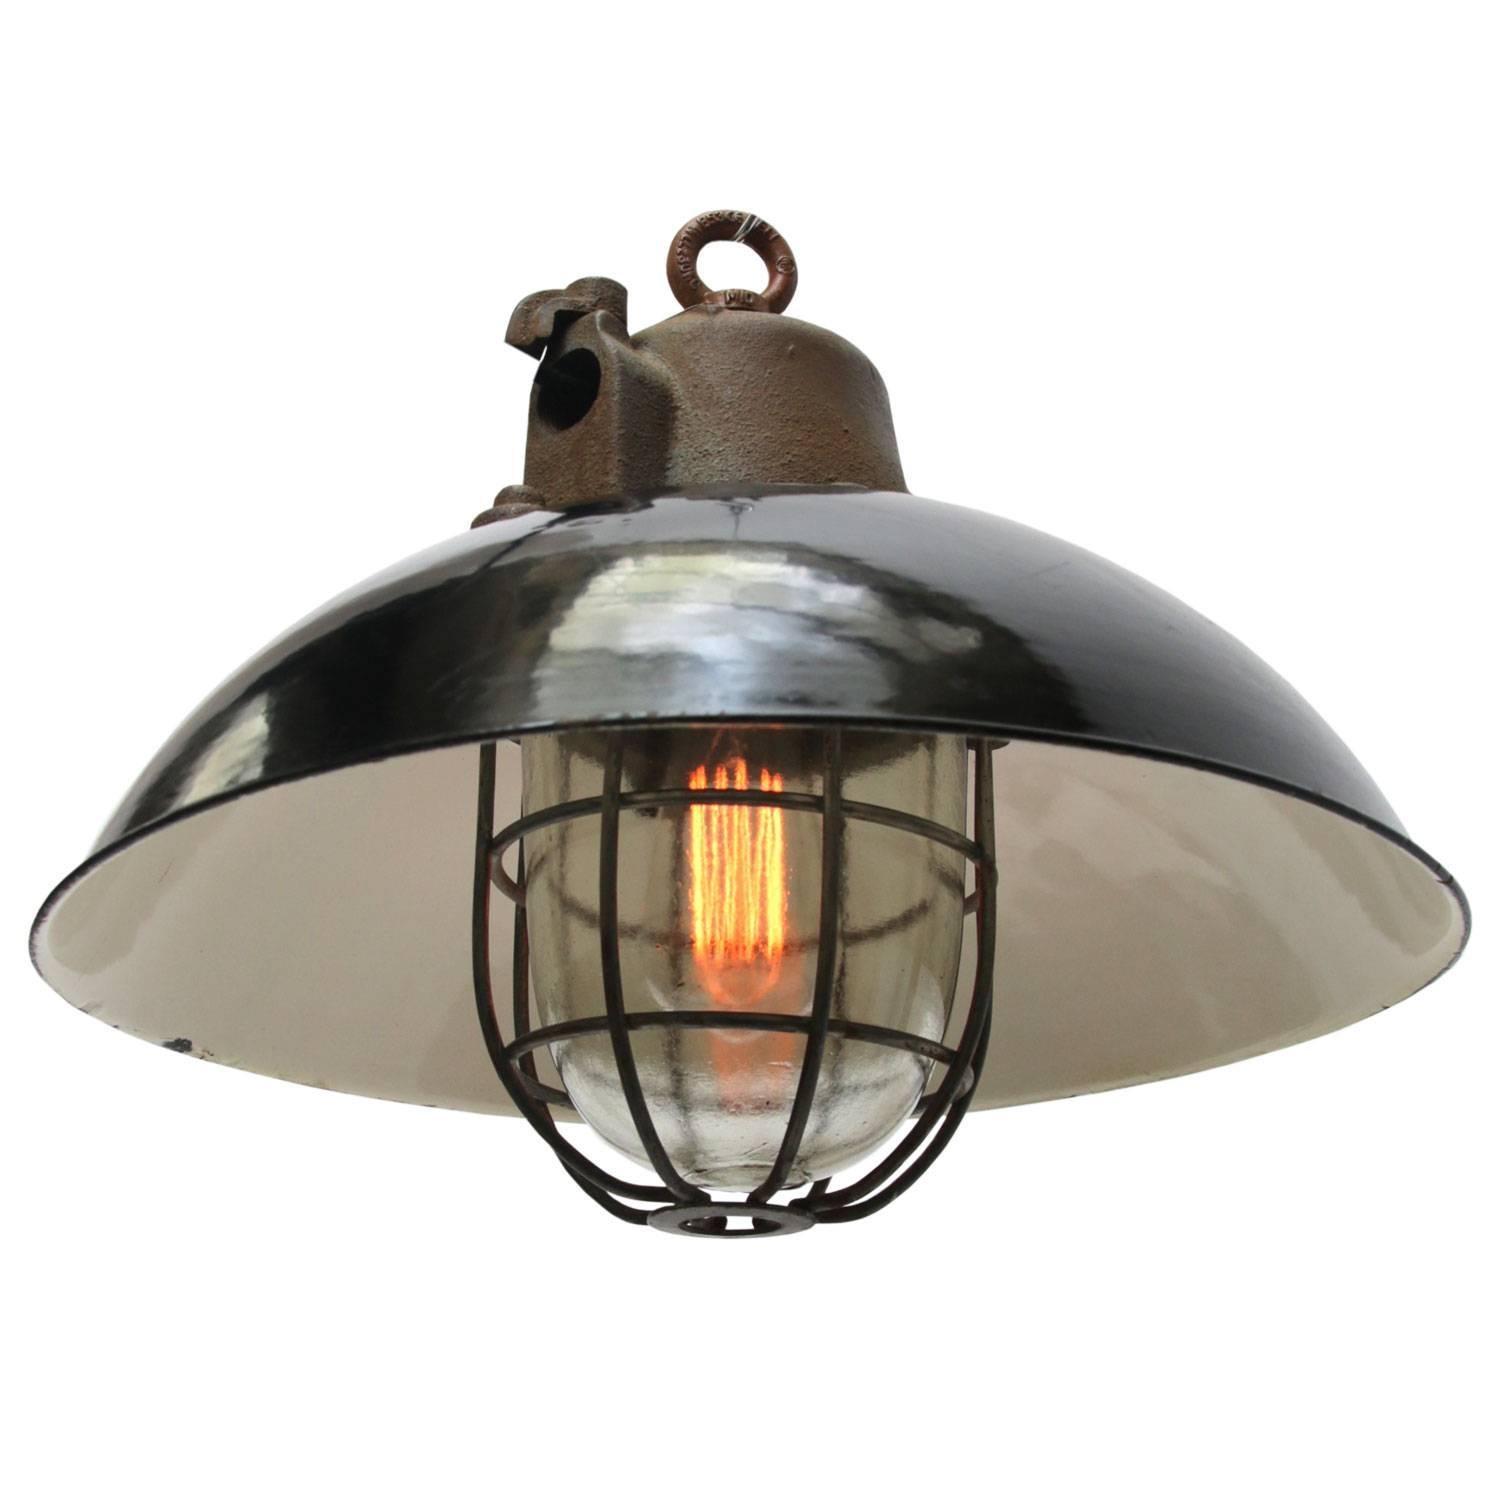 black enamel and cast iron. Clear glass.

Weight: 9.0 kg / 19.8 lb.

All lamps have been made suitable by international standards for incandescent light bulbs, energy-efficient and LED bulbs. E26/E27 bulb holders and new wiring are CE certified or